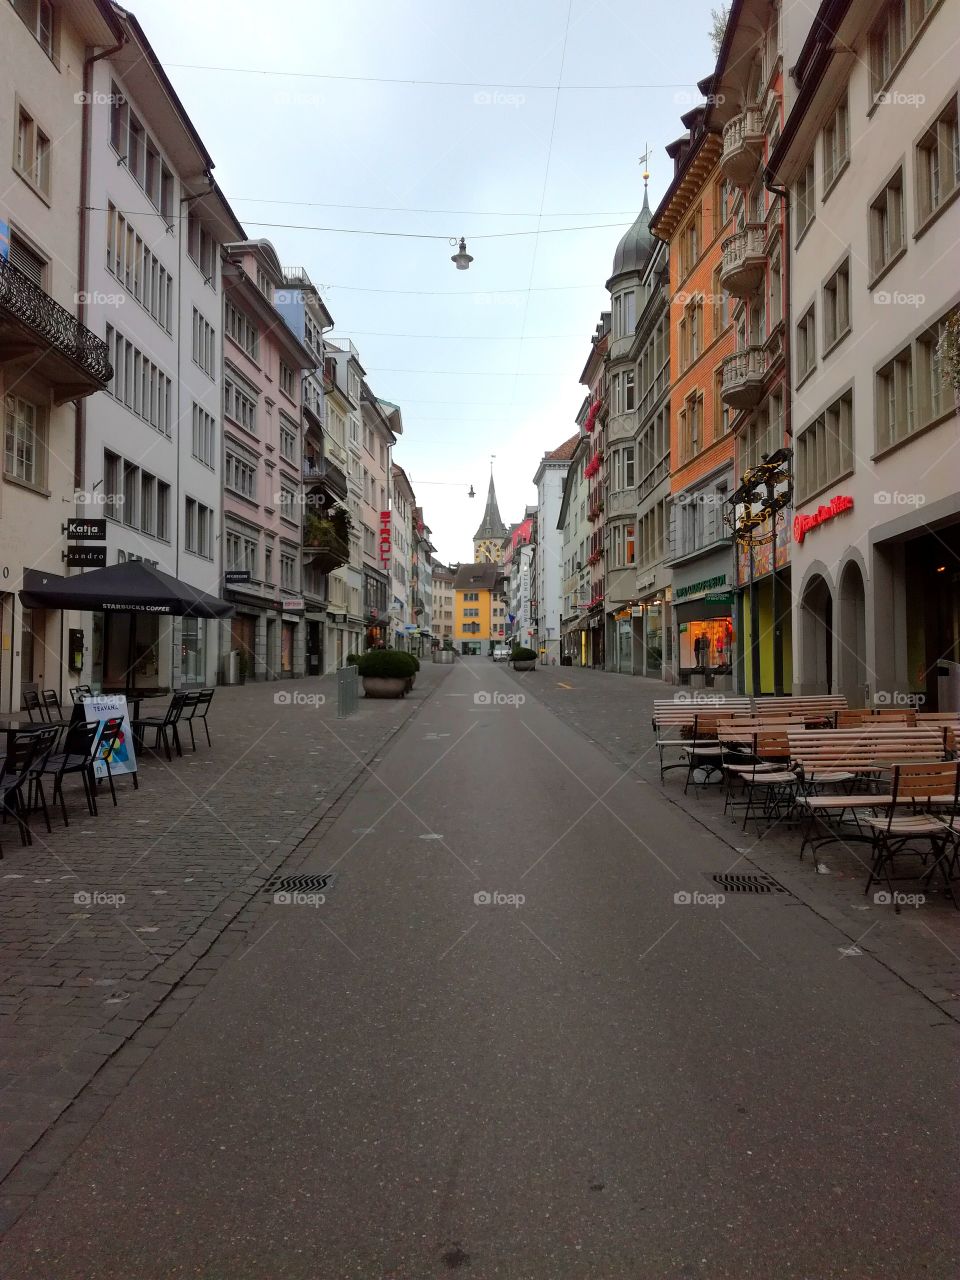 Streets of Zurich on a Sunday